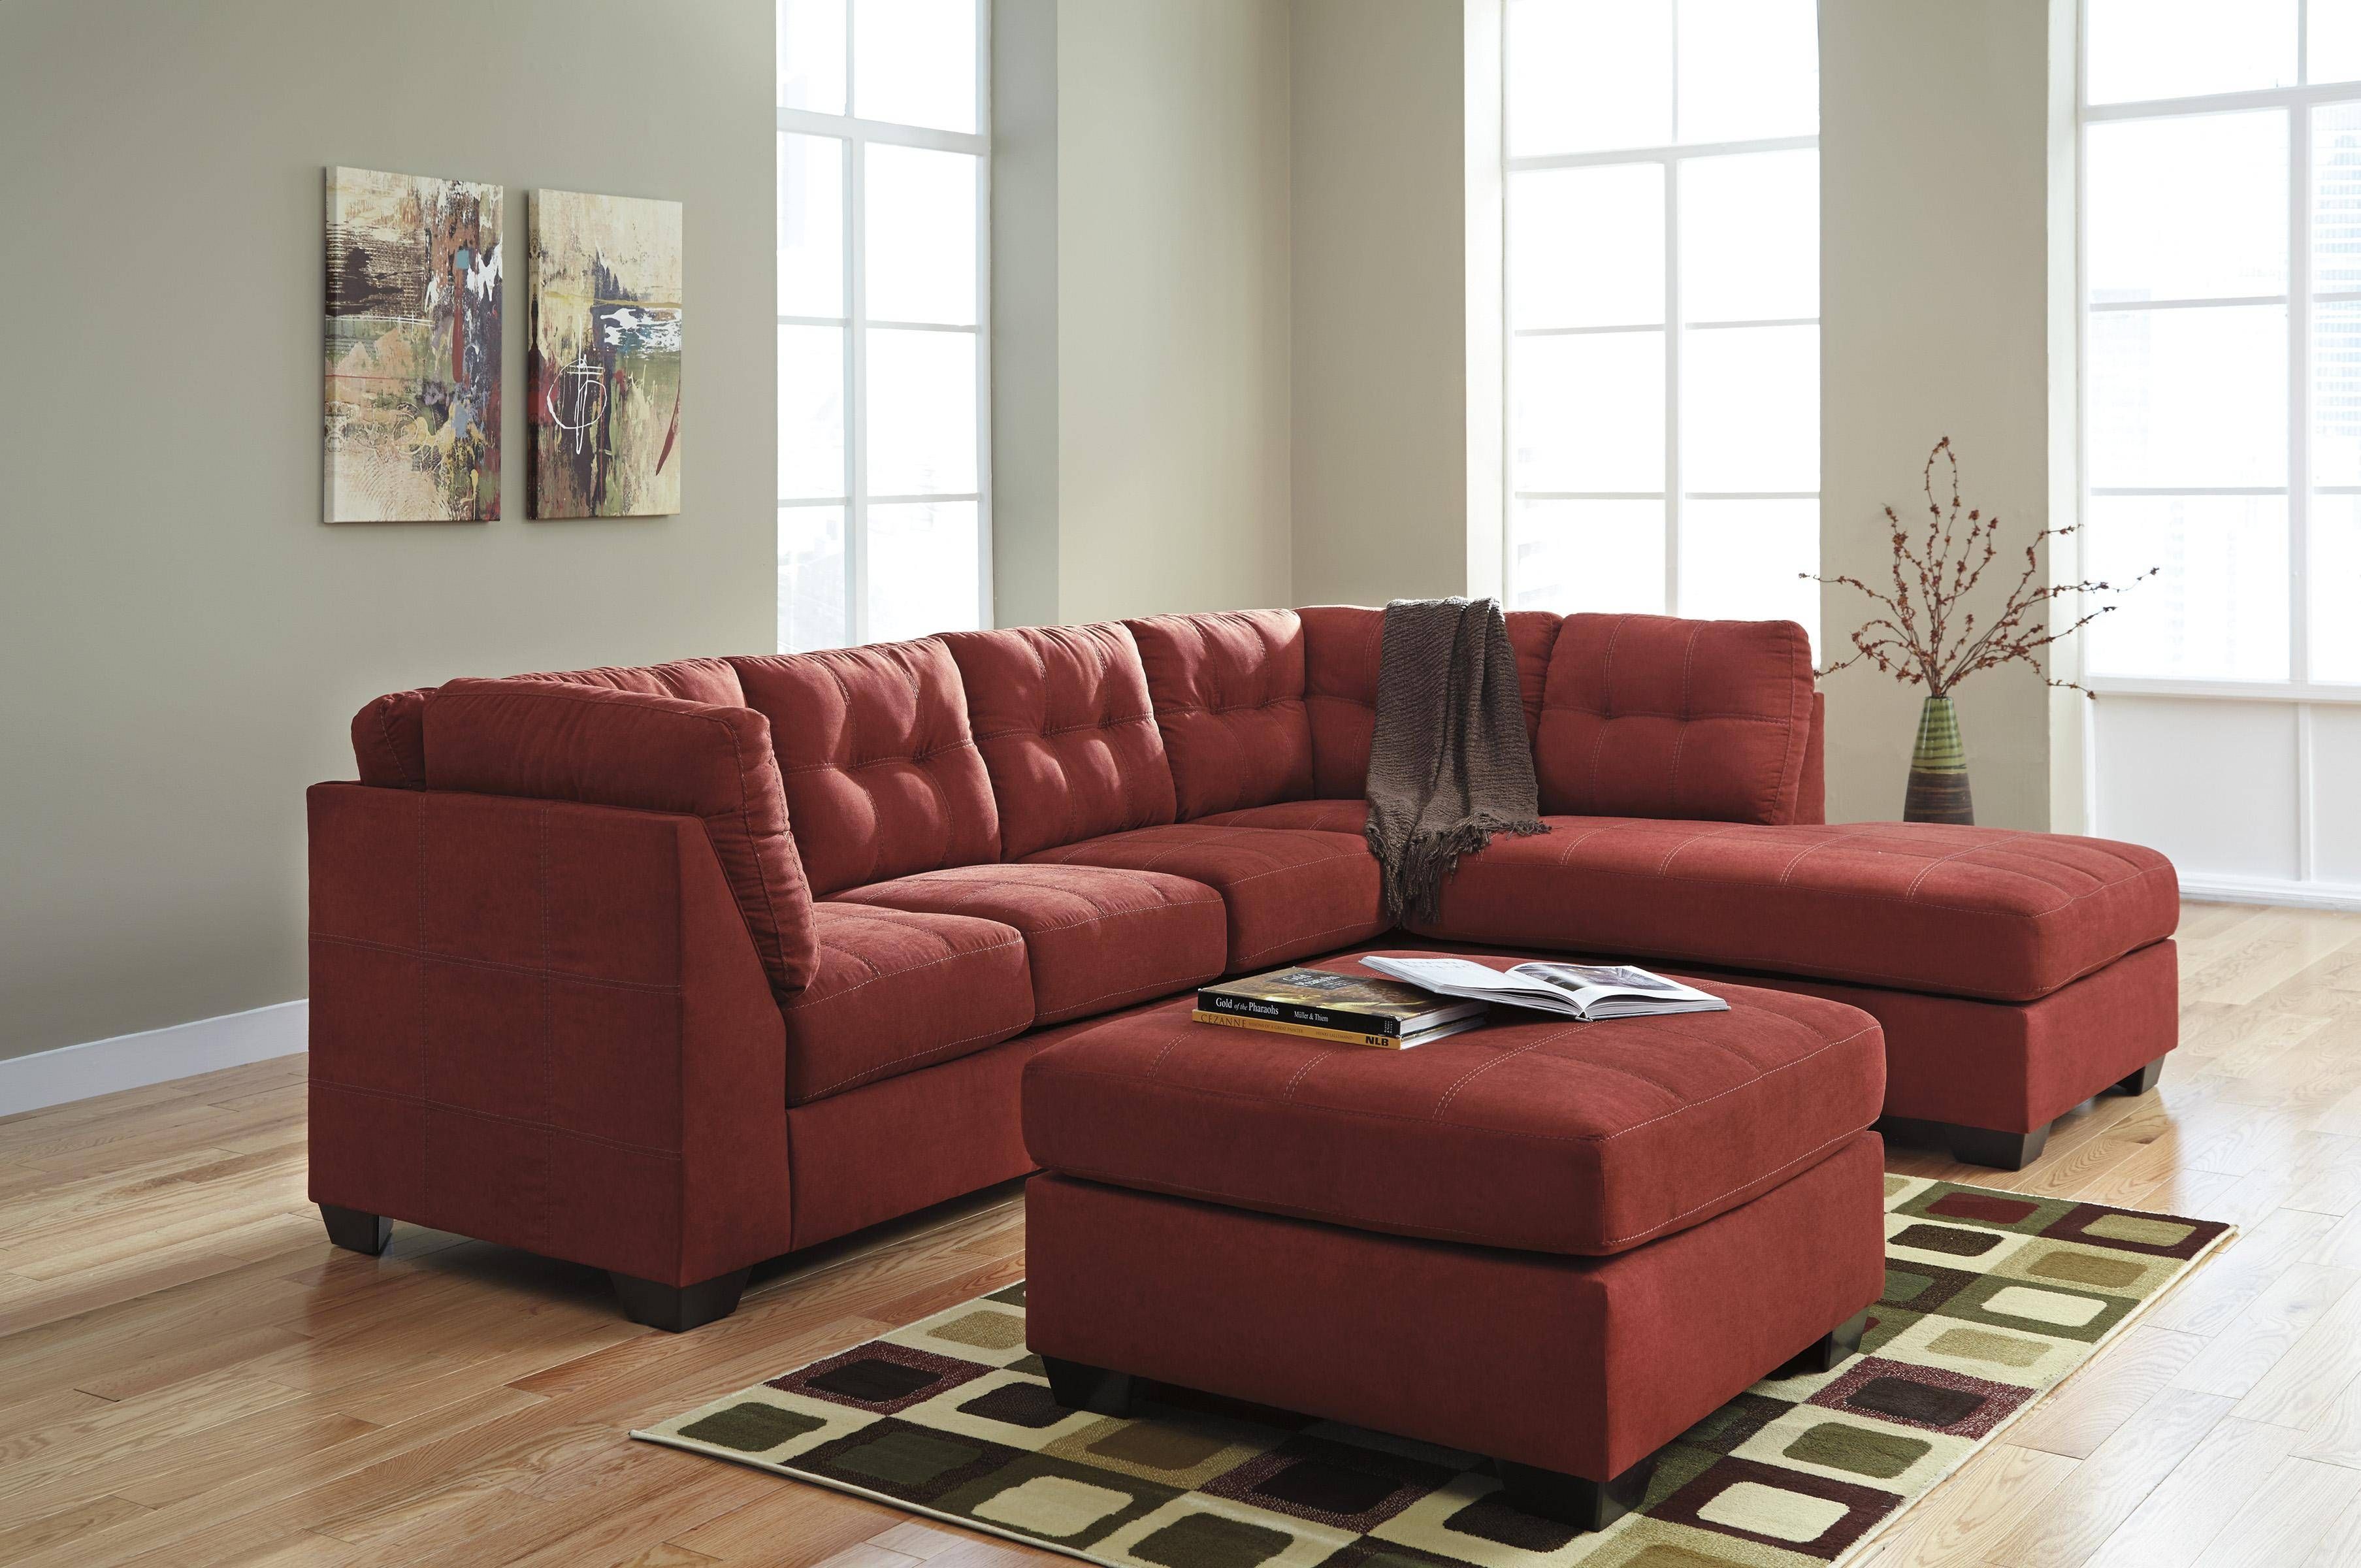 Benchcraft Maier – Sienna 2 Piece Sectional W/ Sleeper Sofa Intended For Red Sleeper Sofa (View 27 of 30)